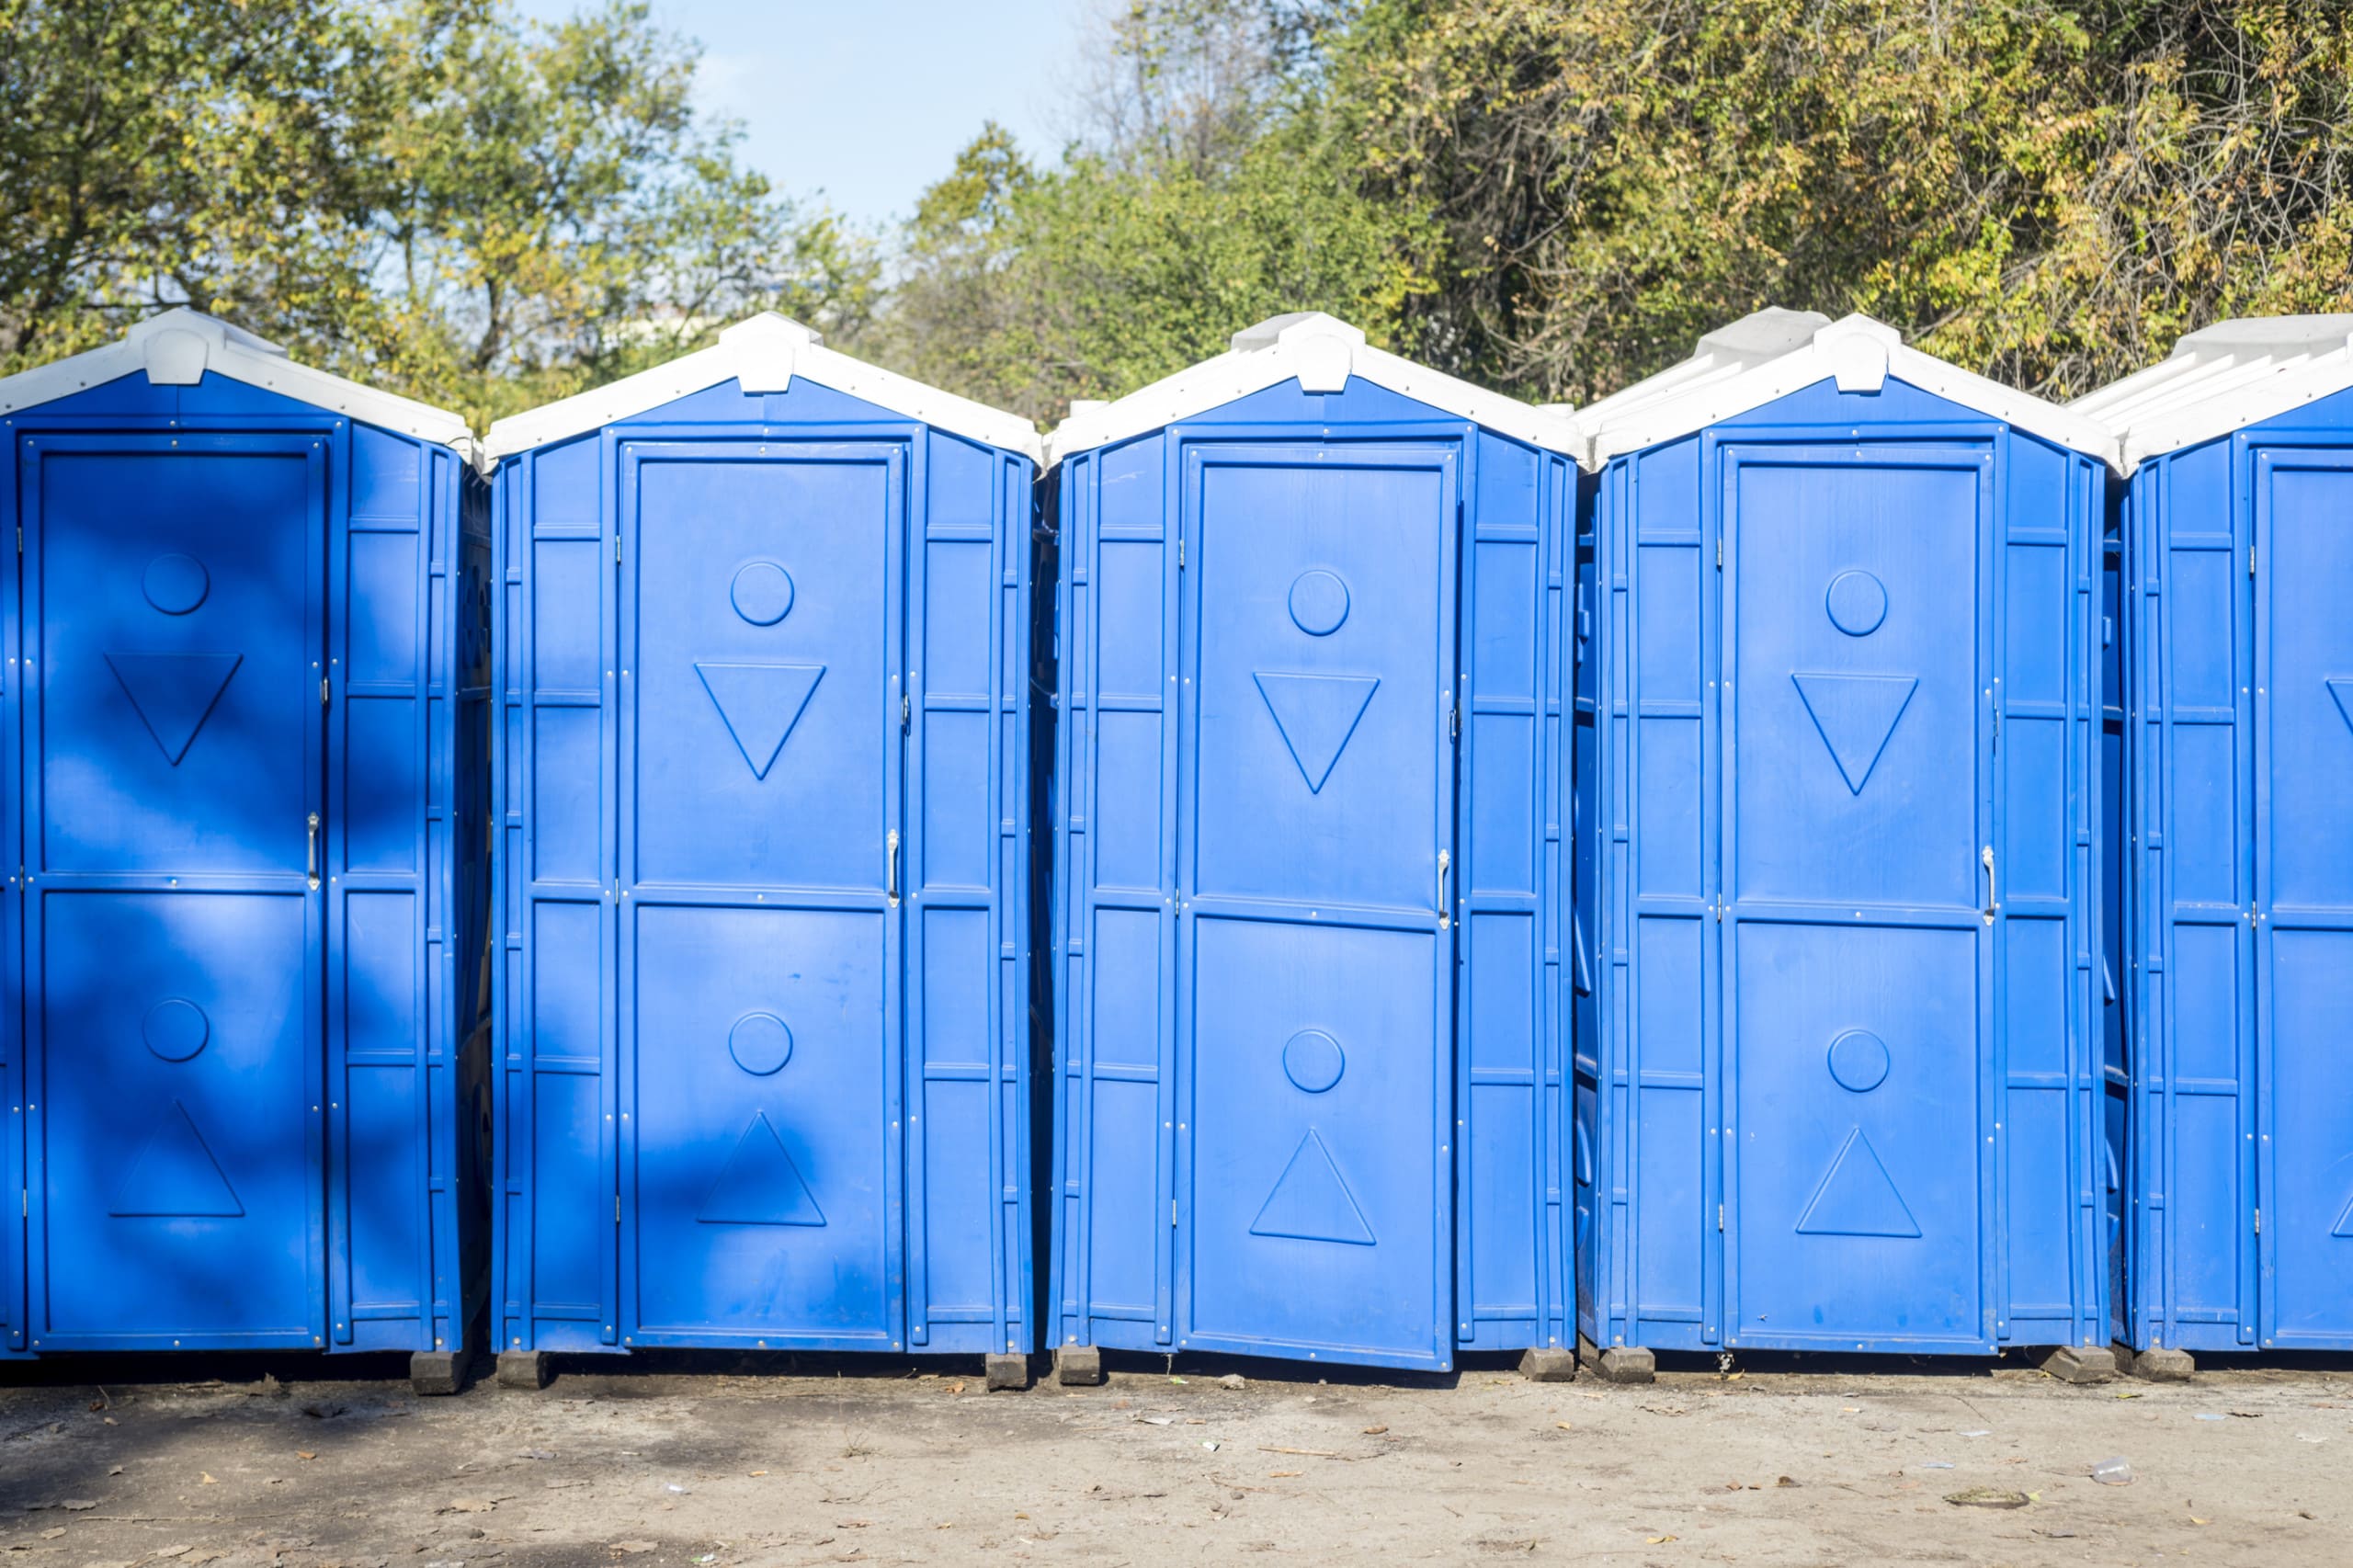 Long row of portable bio toilet cabins. Blue cabines of bio toilets. A large number of street toilets